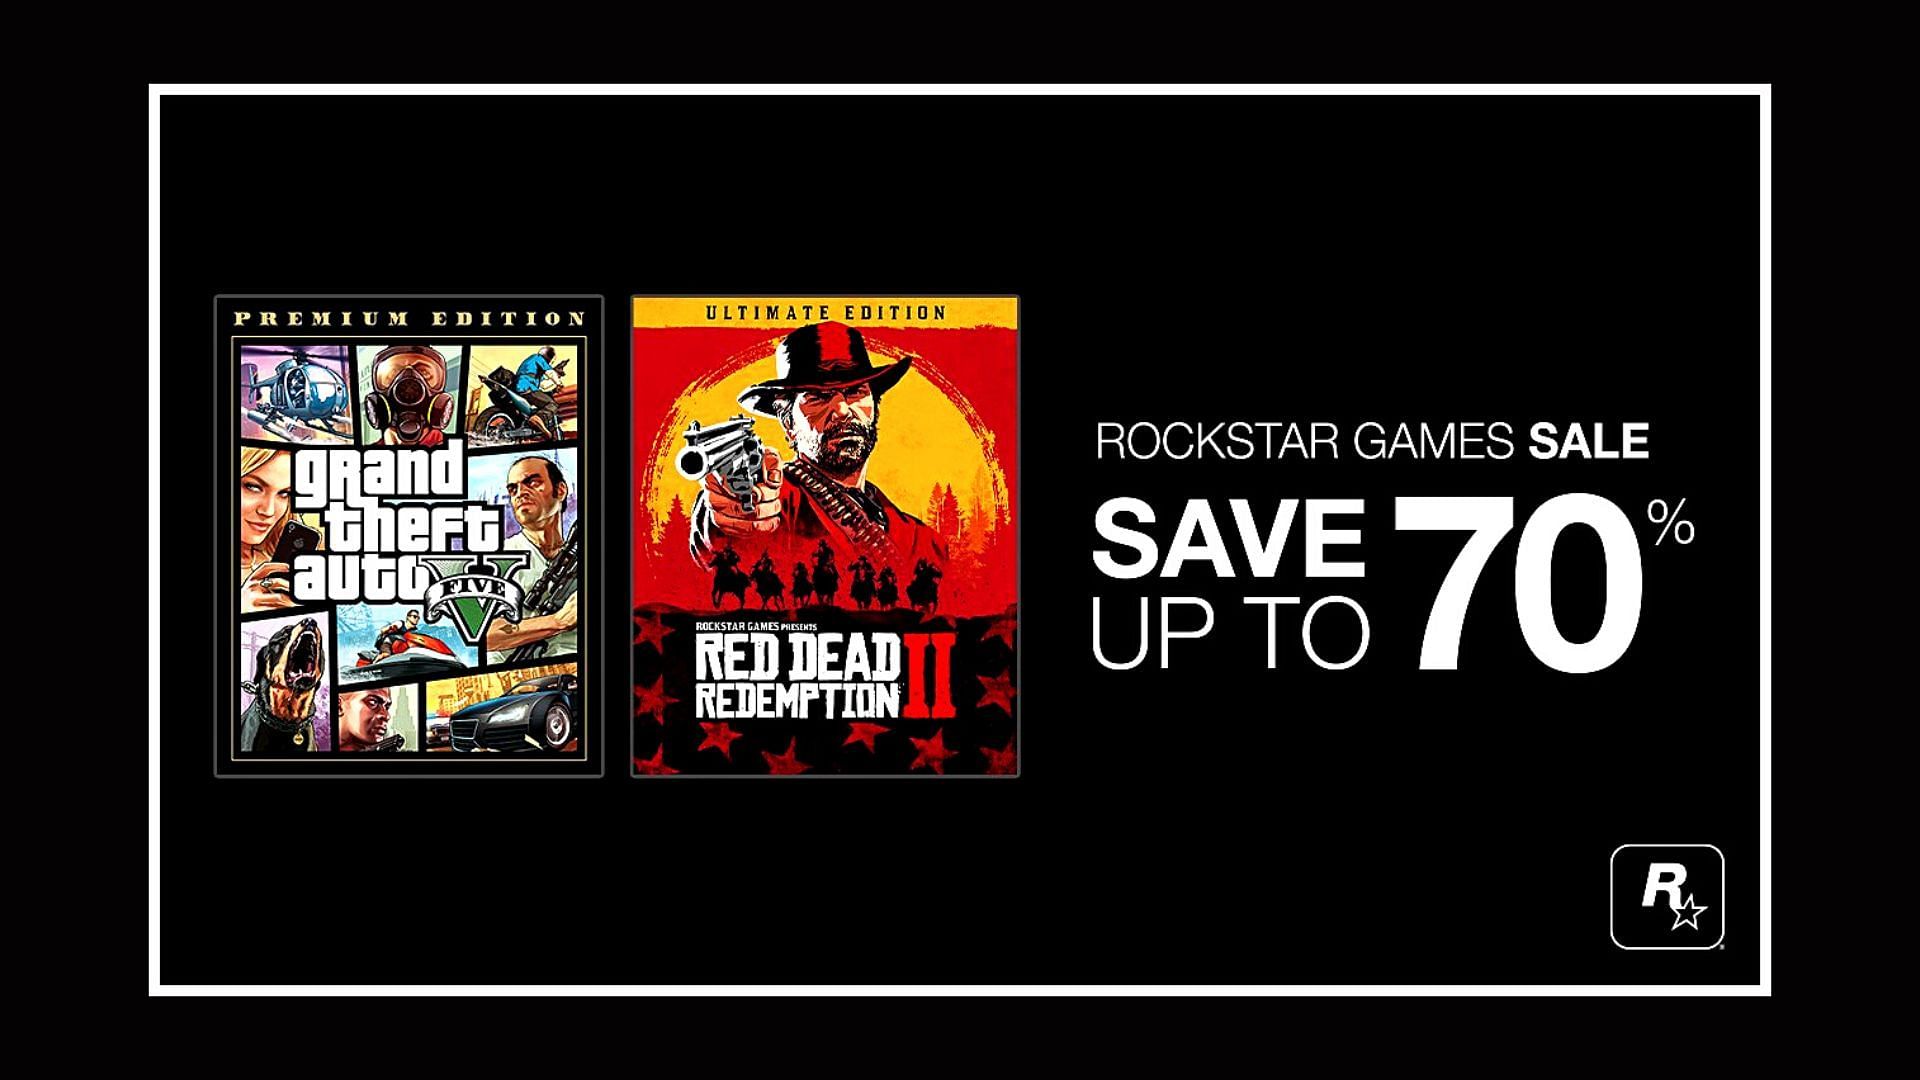 Rockstar Games announces Steam Sale offering GTA 5 and more titles